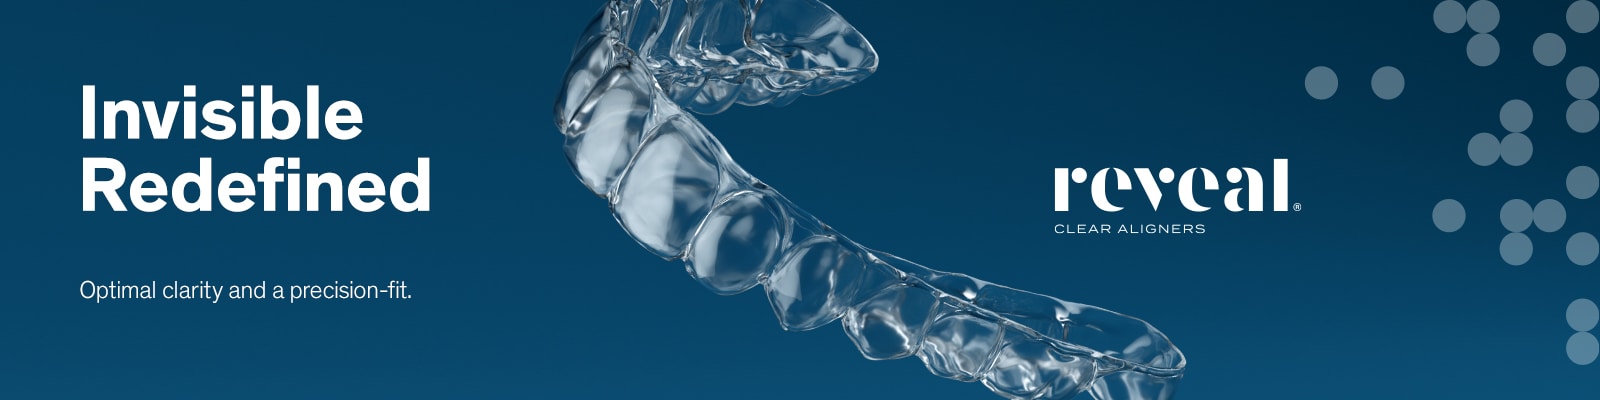 Reveal Clear Aligners - Invisible Redfined